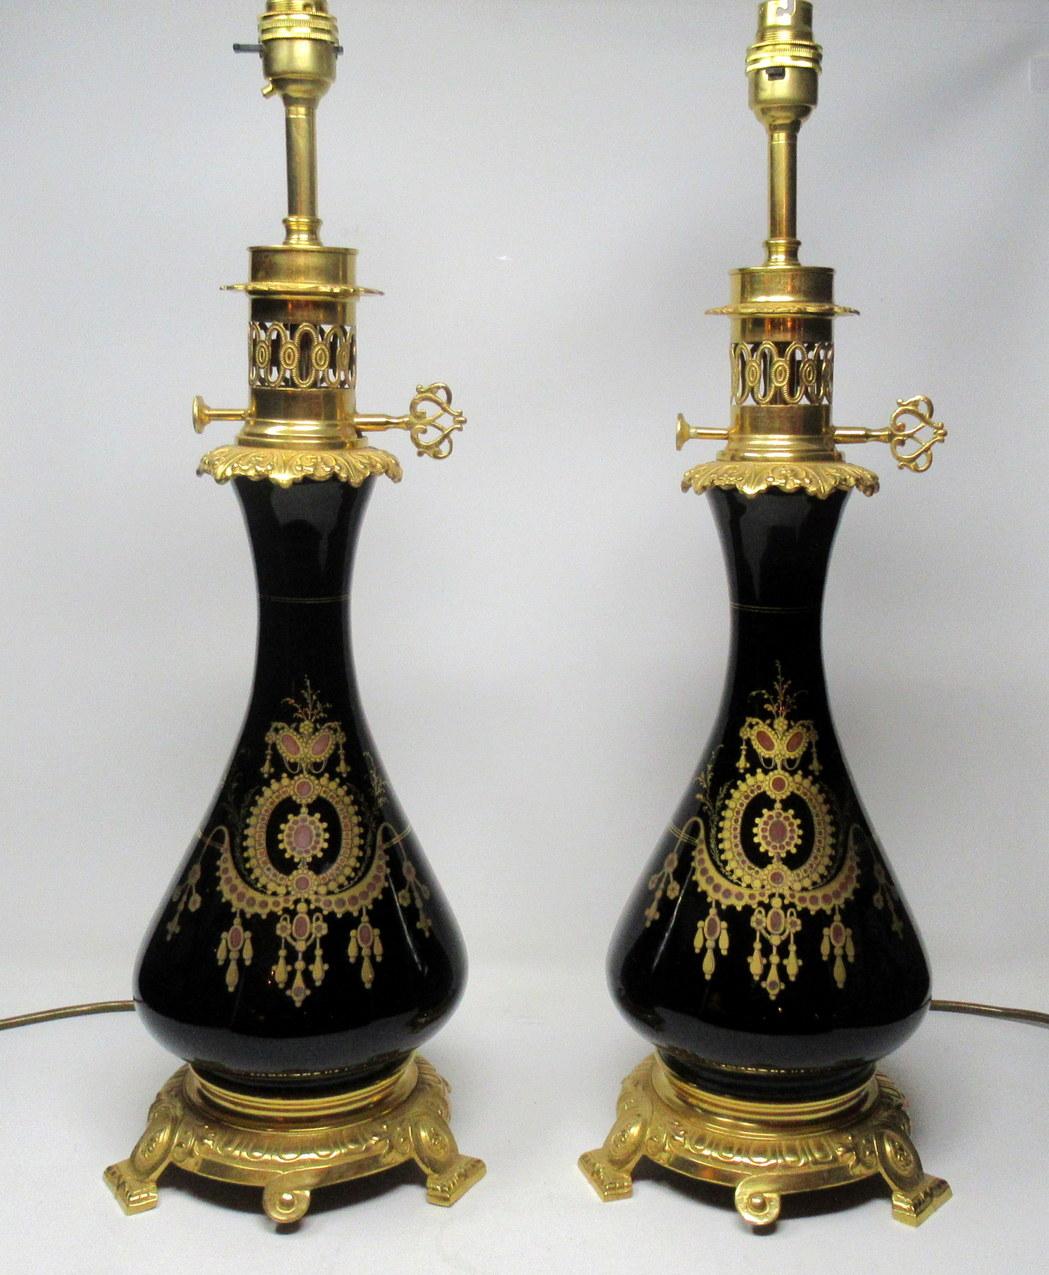 Exceptionally fine pair of French black enameled glass and ormolu-mounted fluid lamps, now converted to electricity, early to mid-19th century.

The twin original ormolu part burners with lavish pierced decoration above a bell shaped body with